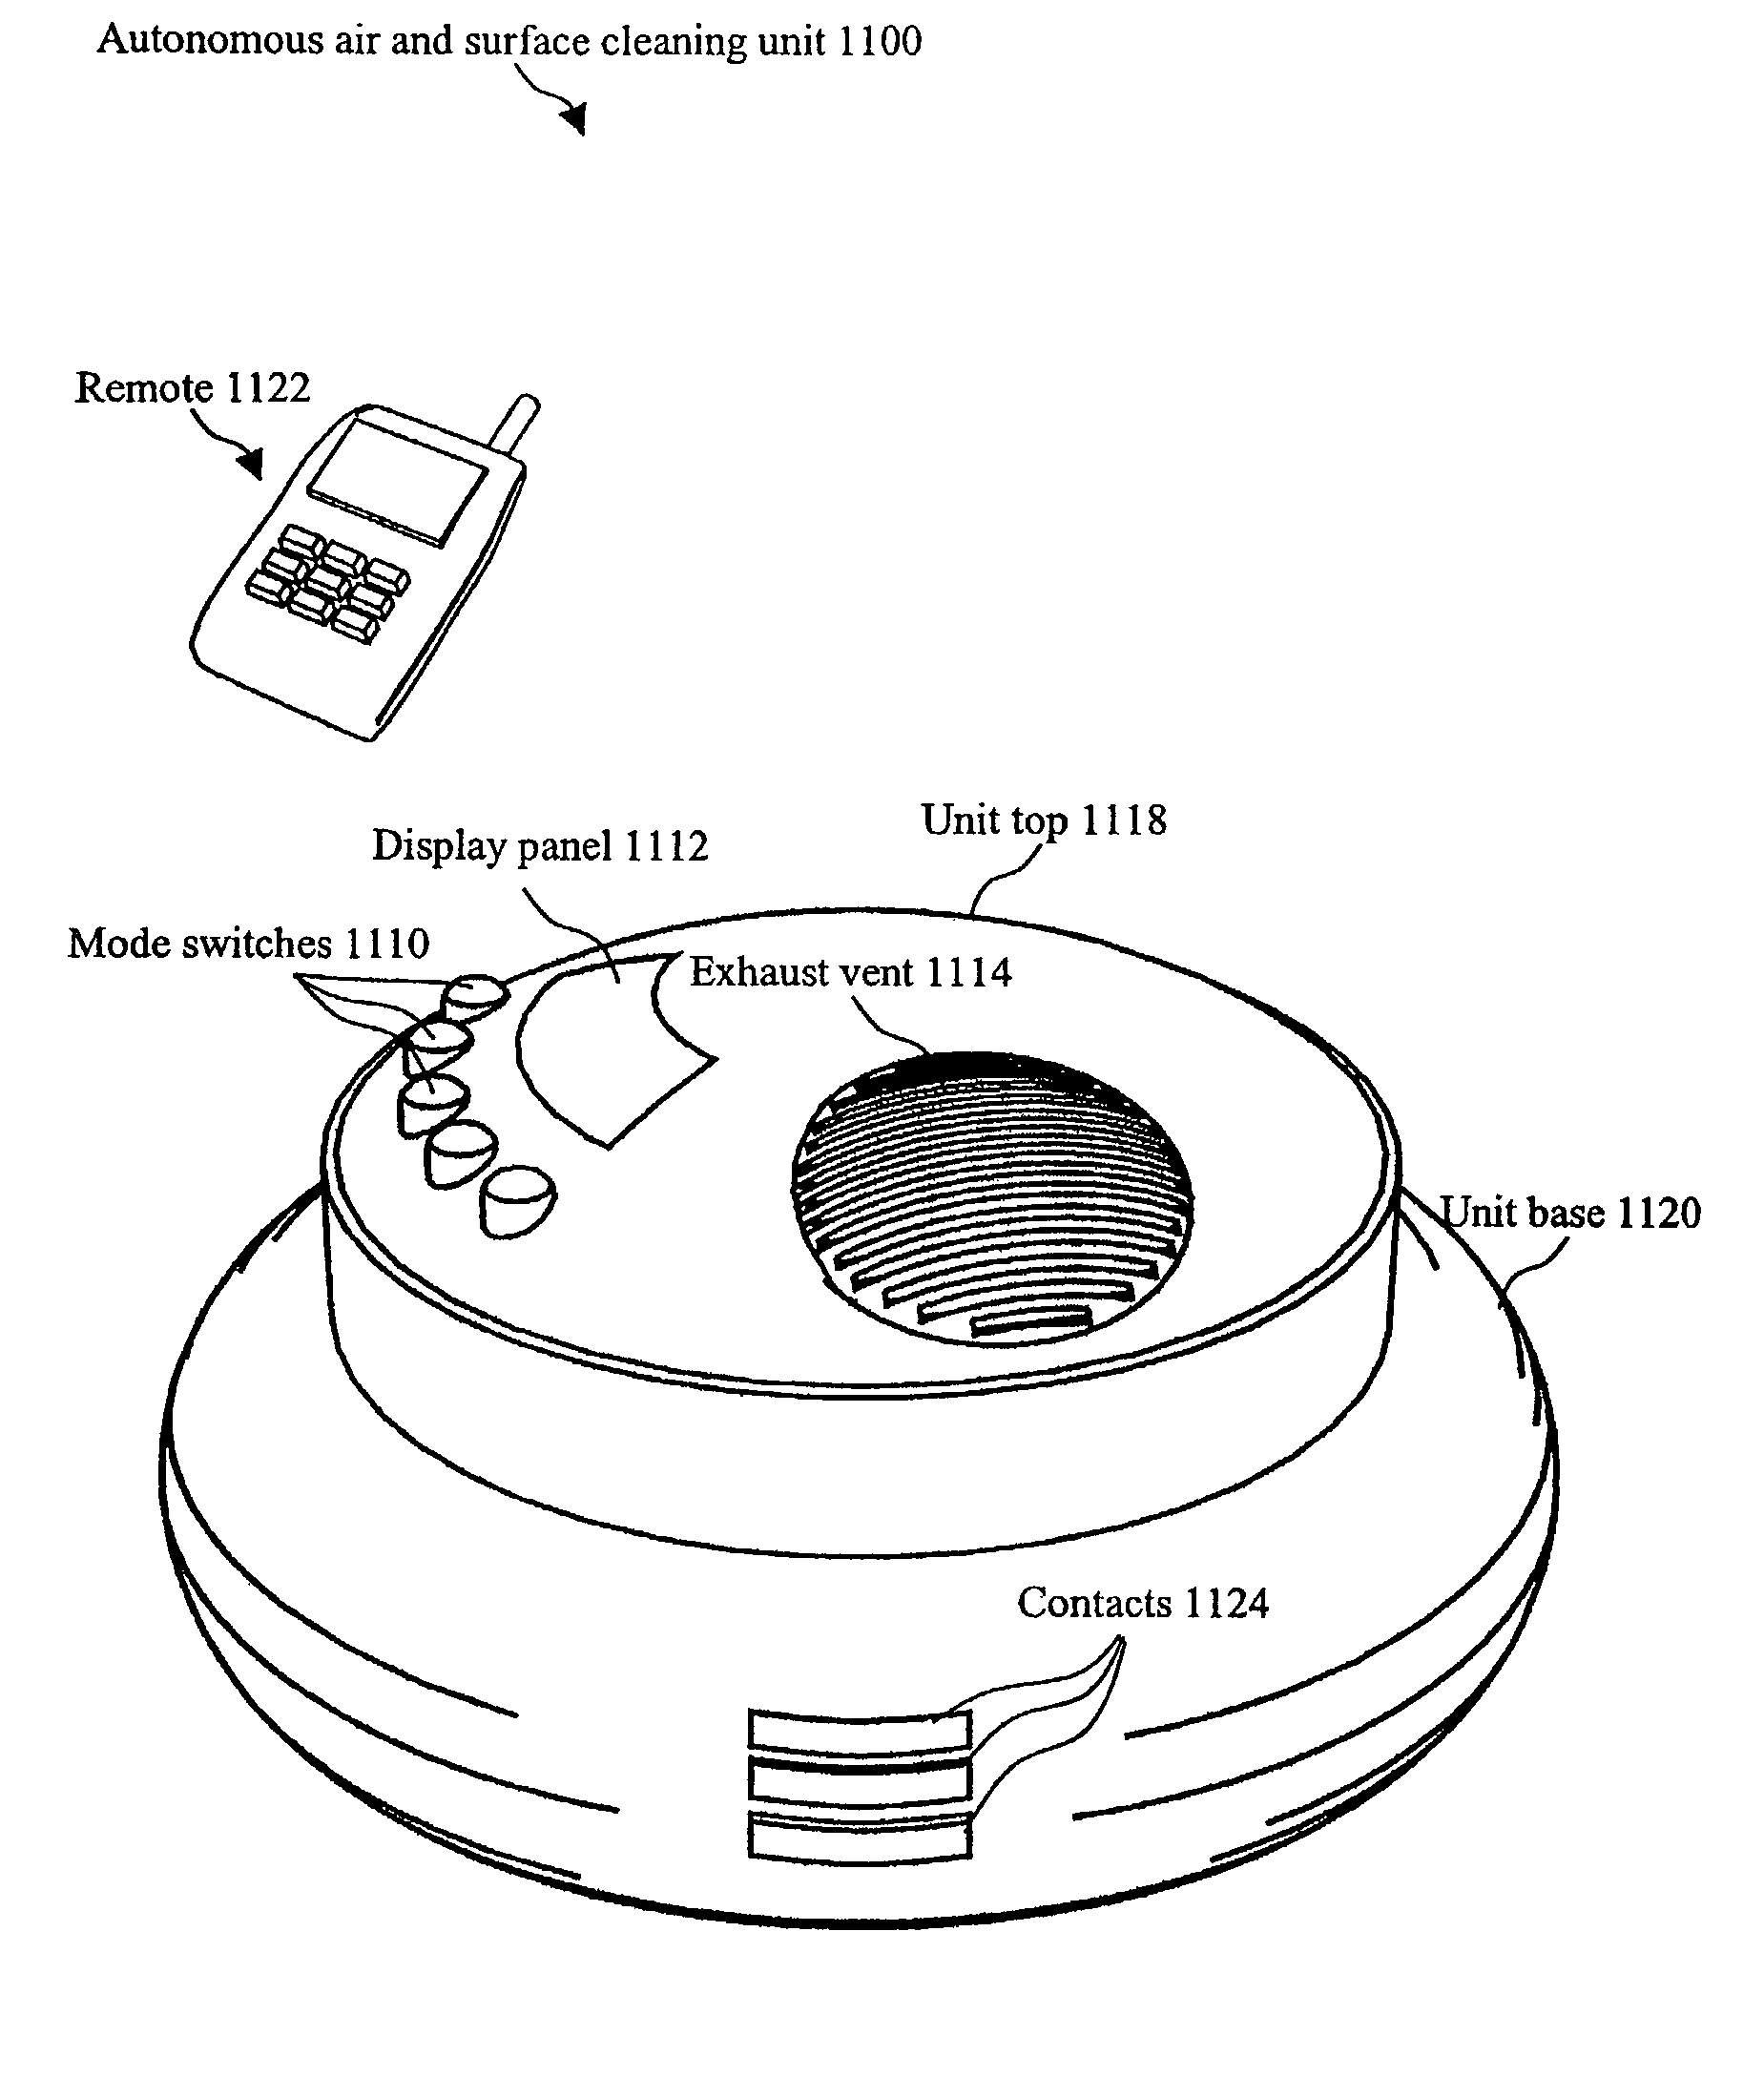 Device and methods of providing air purification in combination with superficial floor cleaning